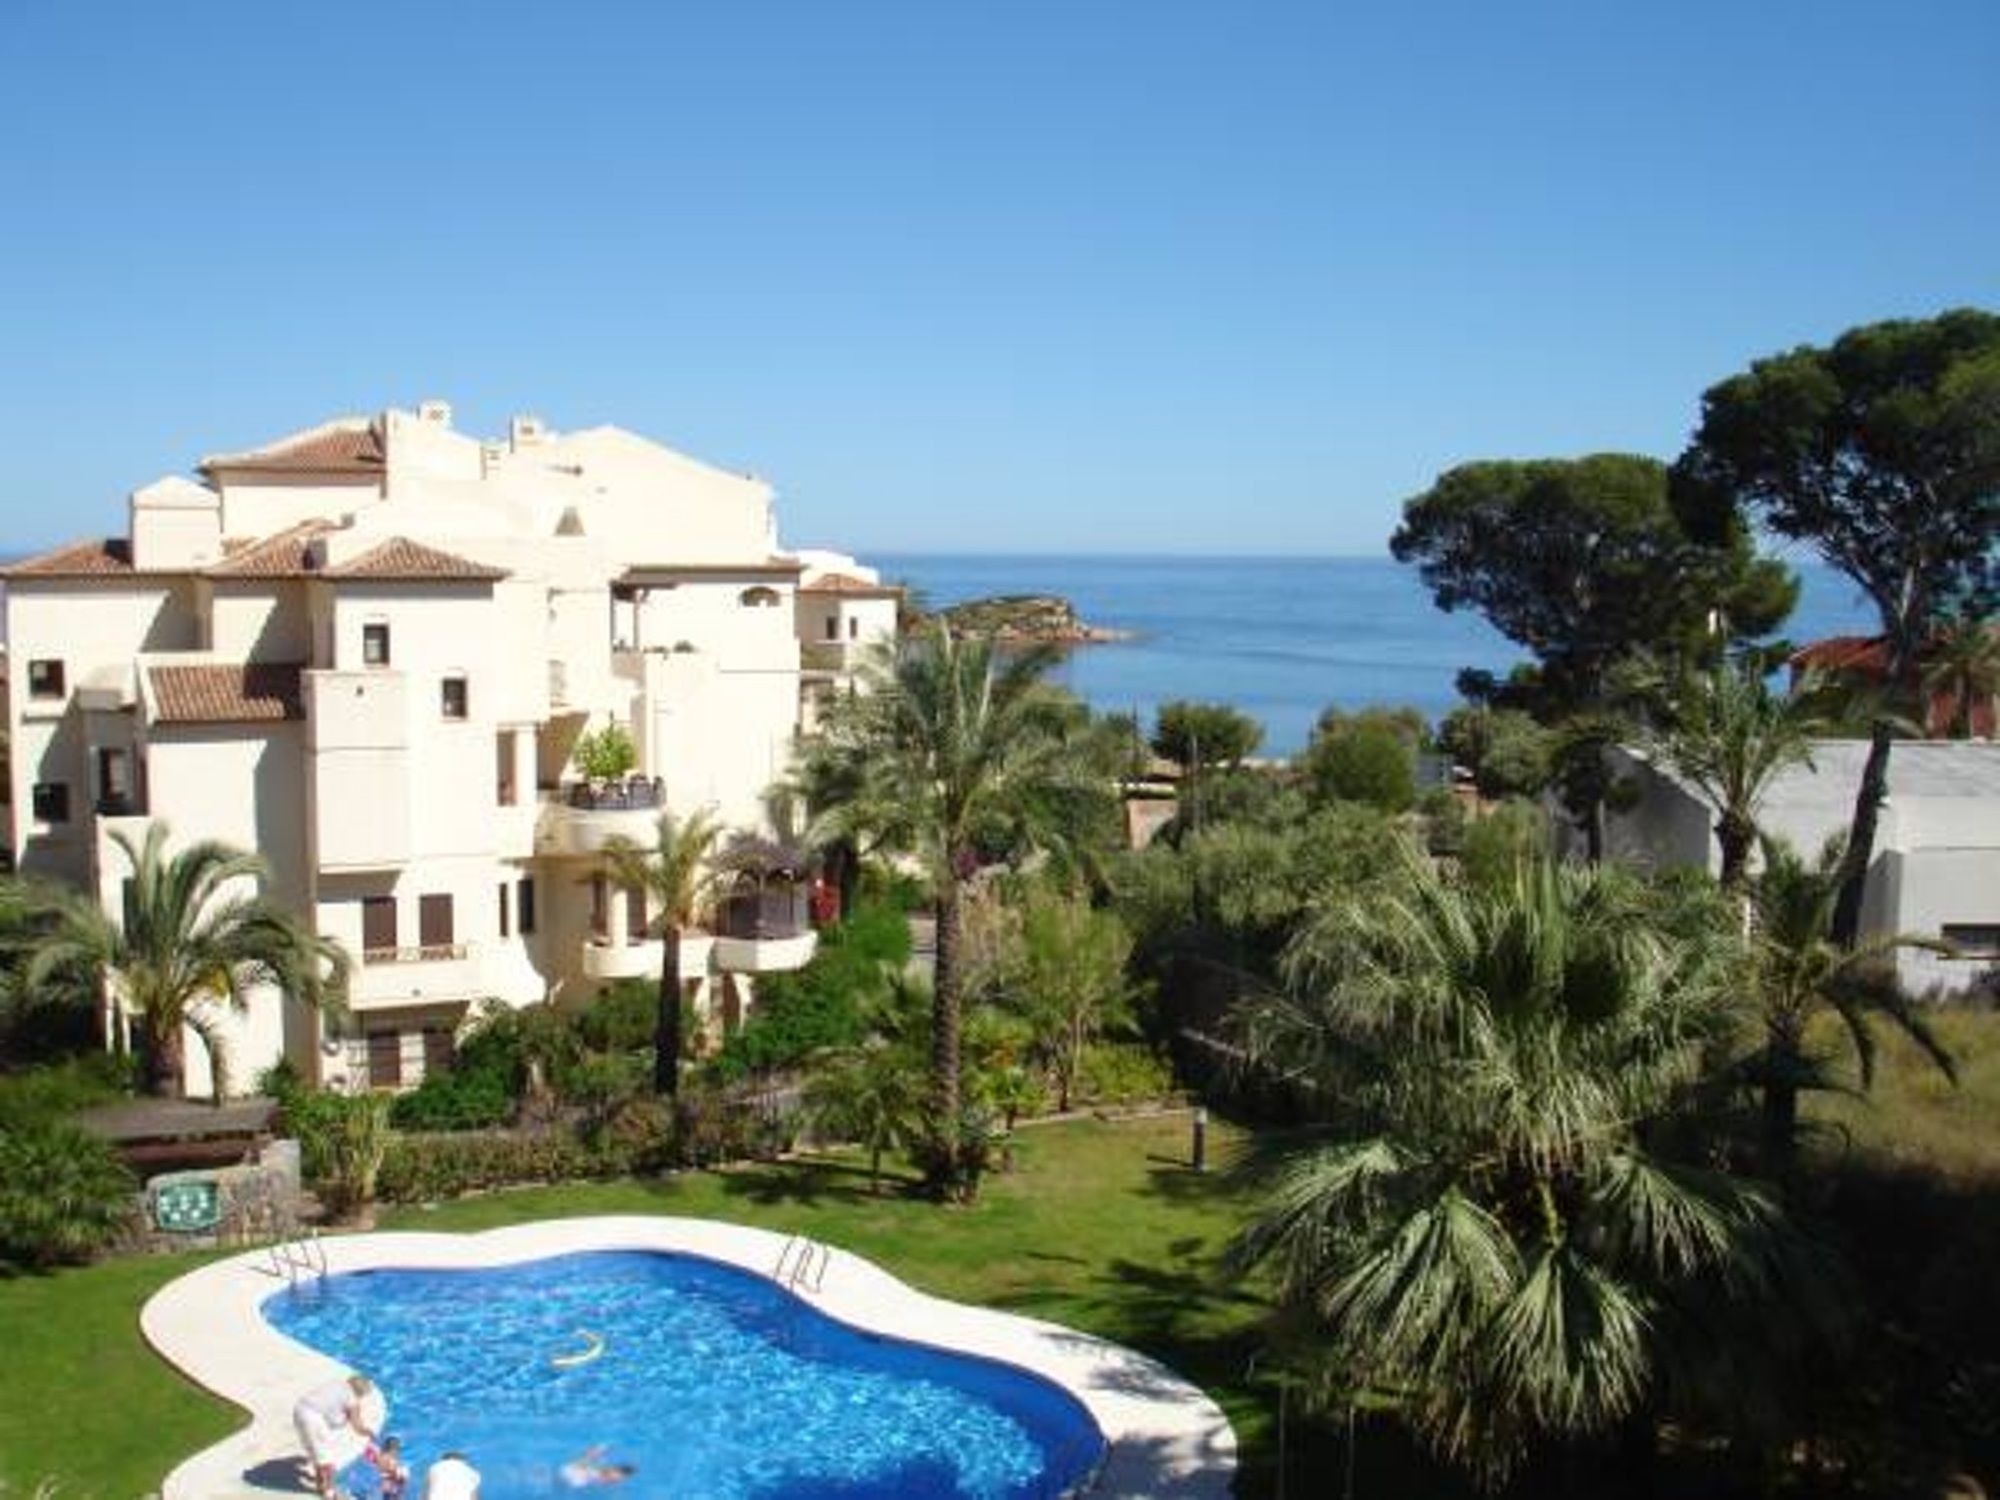 Delightful Apartment on the Costa Blanca With Pool and sea Views, 100m